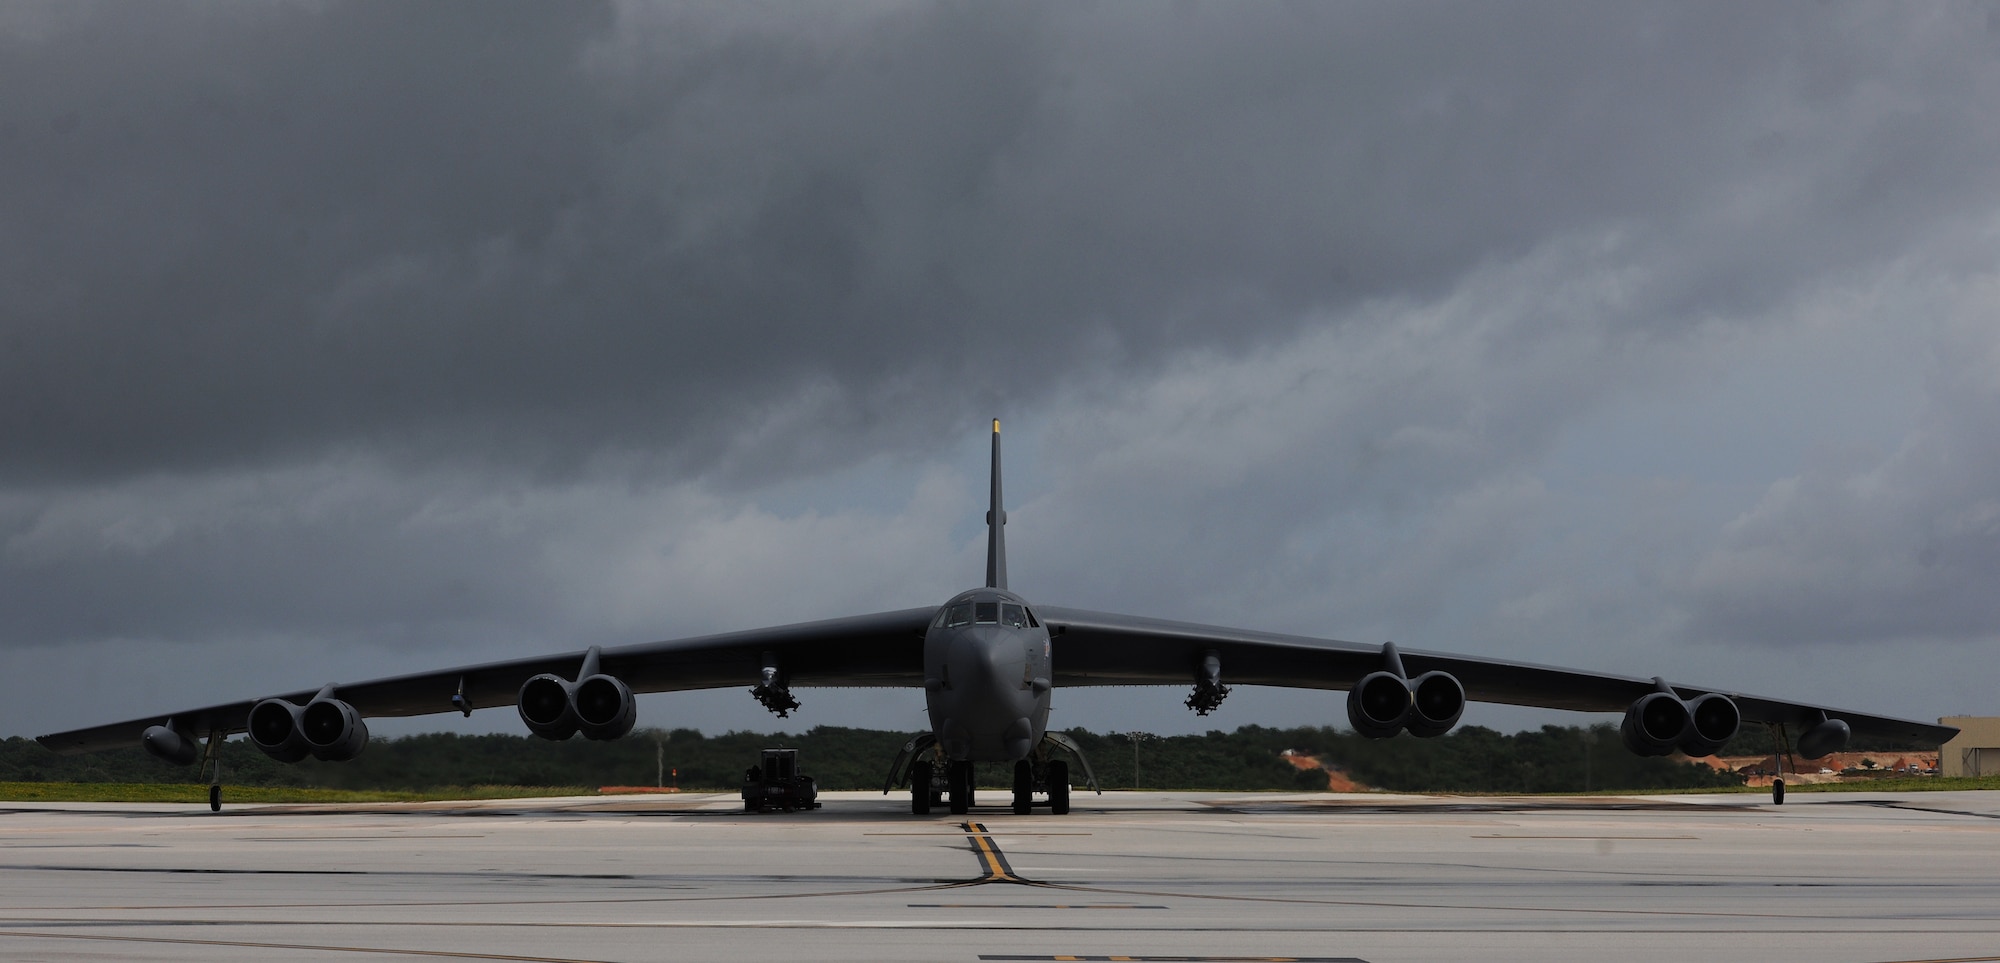 A B-52 Stratofortress prepares to taxi on Andersen Air Force Base, Guam, Aug. 24, 2016. The B-52s have served non-stop rotations since 2006, which have been shared between the bomber squadrons from Minot AFB, N.D., and Barksdale AFB, La. (U.S. Air Force photo by Staff Sgt. Benjamin Gonsier)